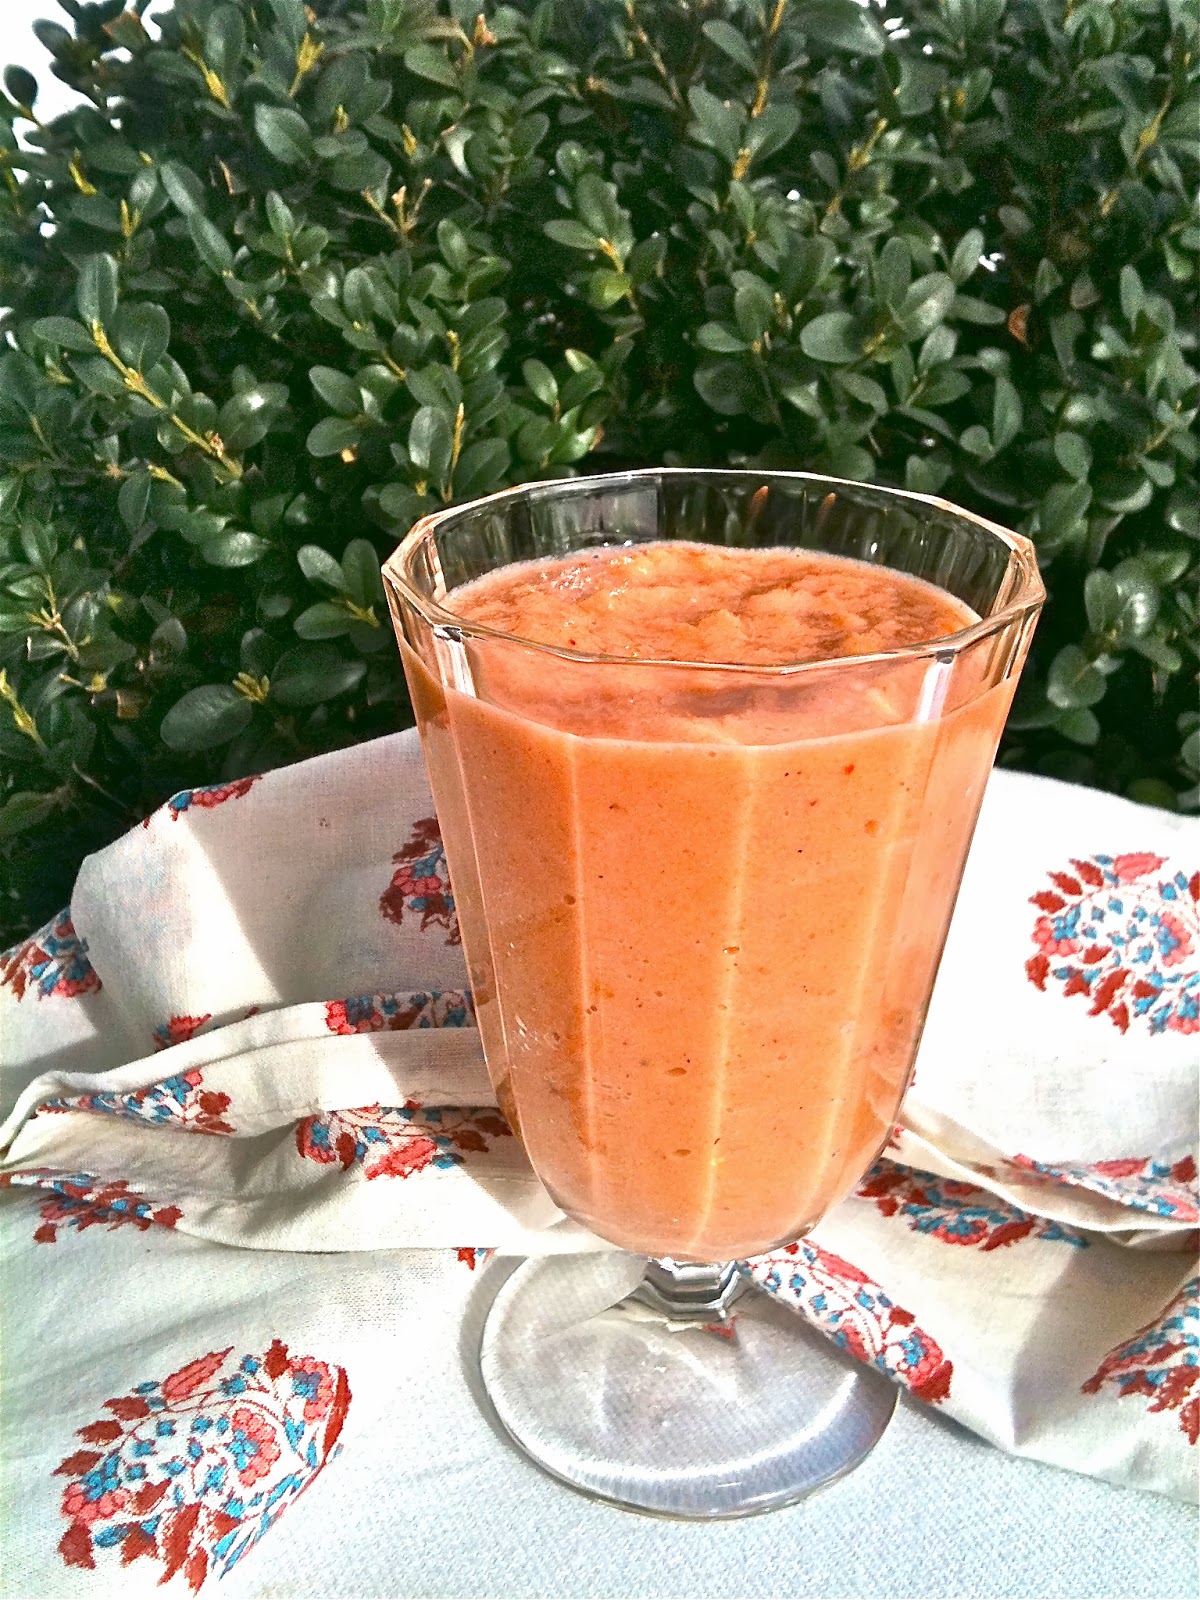 Passionately Raw! : Spicy Raw Carrot Banana Smoothie